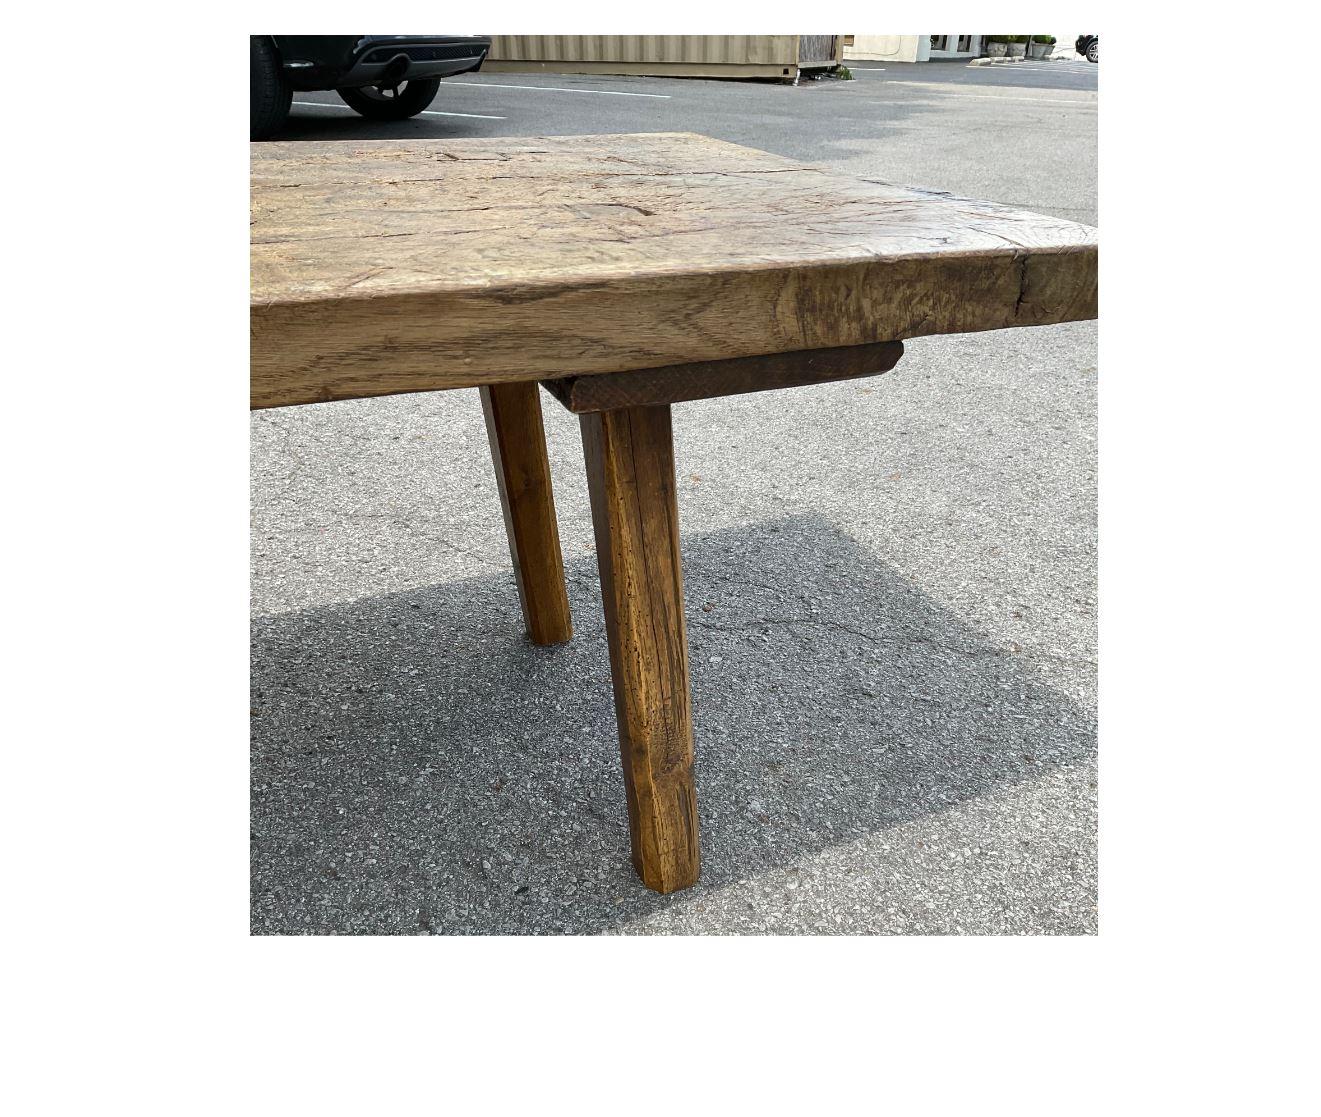 This piece was originally a Hungarian chopping table and has now been cut down to coffee table height. The top is 2 inches thick and very heavy and durable. The character and patina of this piece are amazing! This unique table would make an